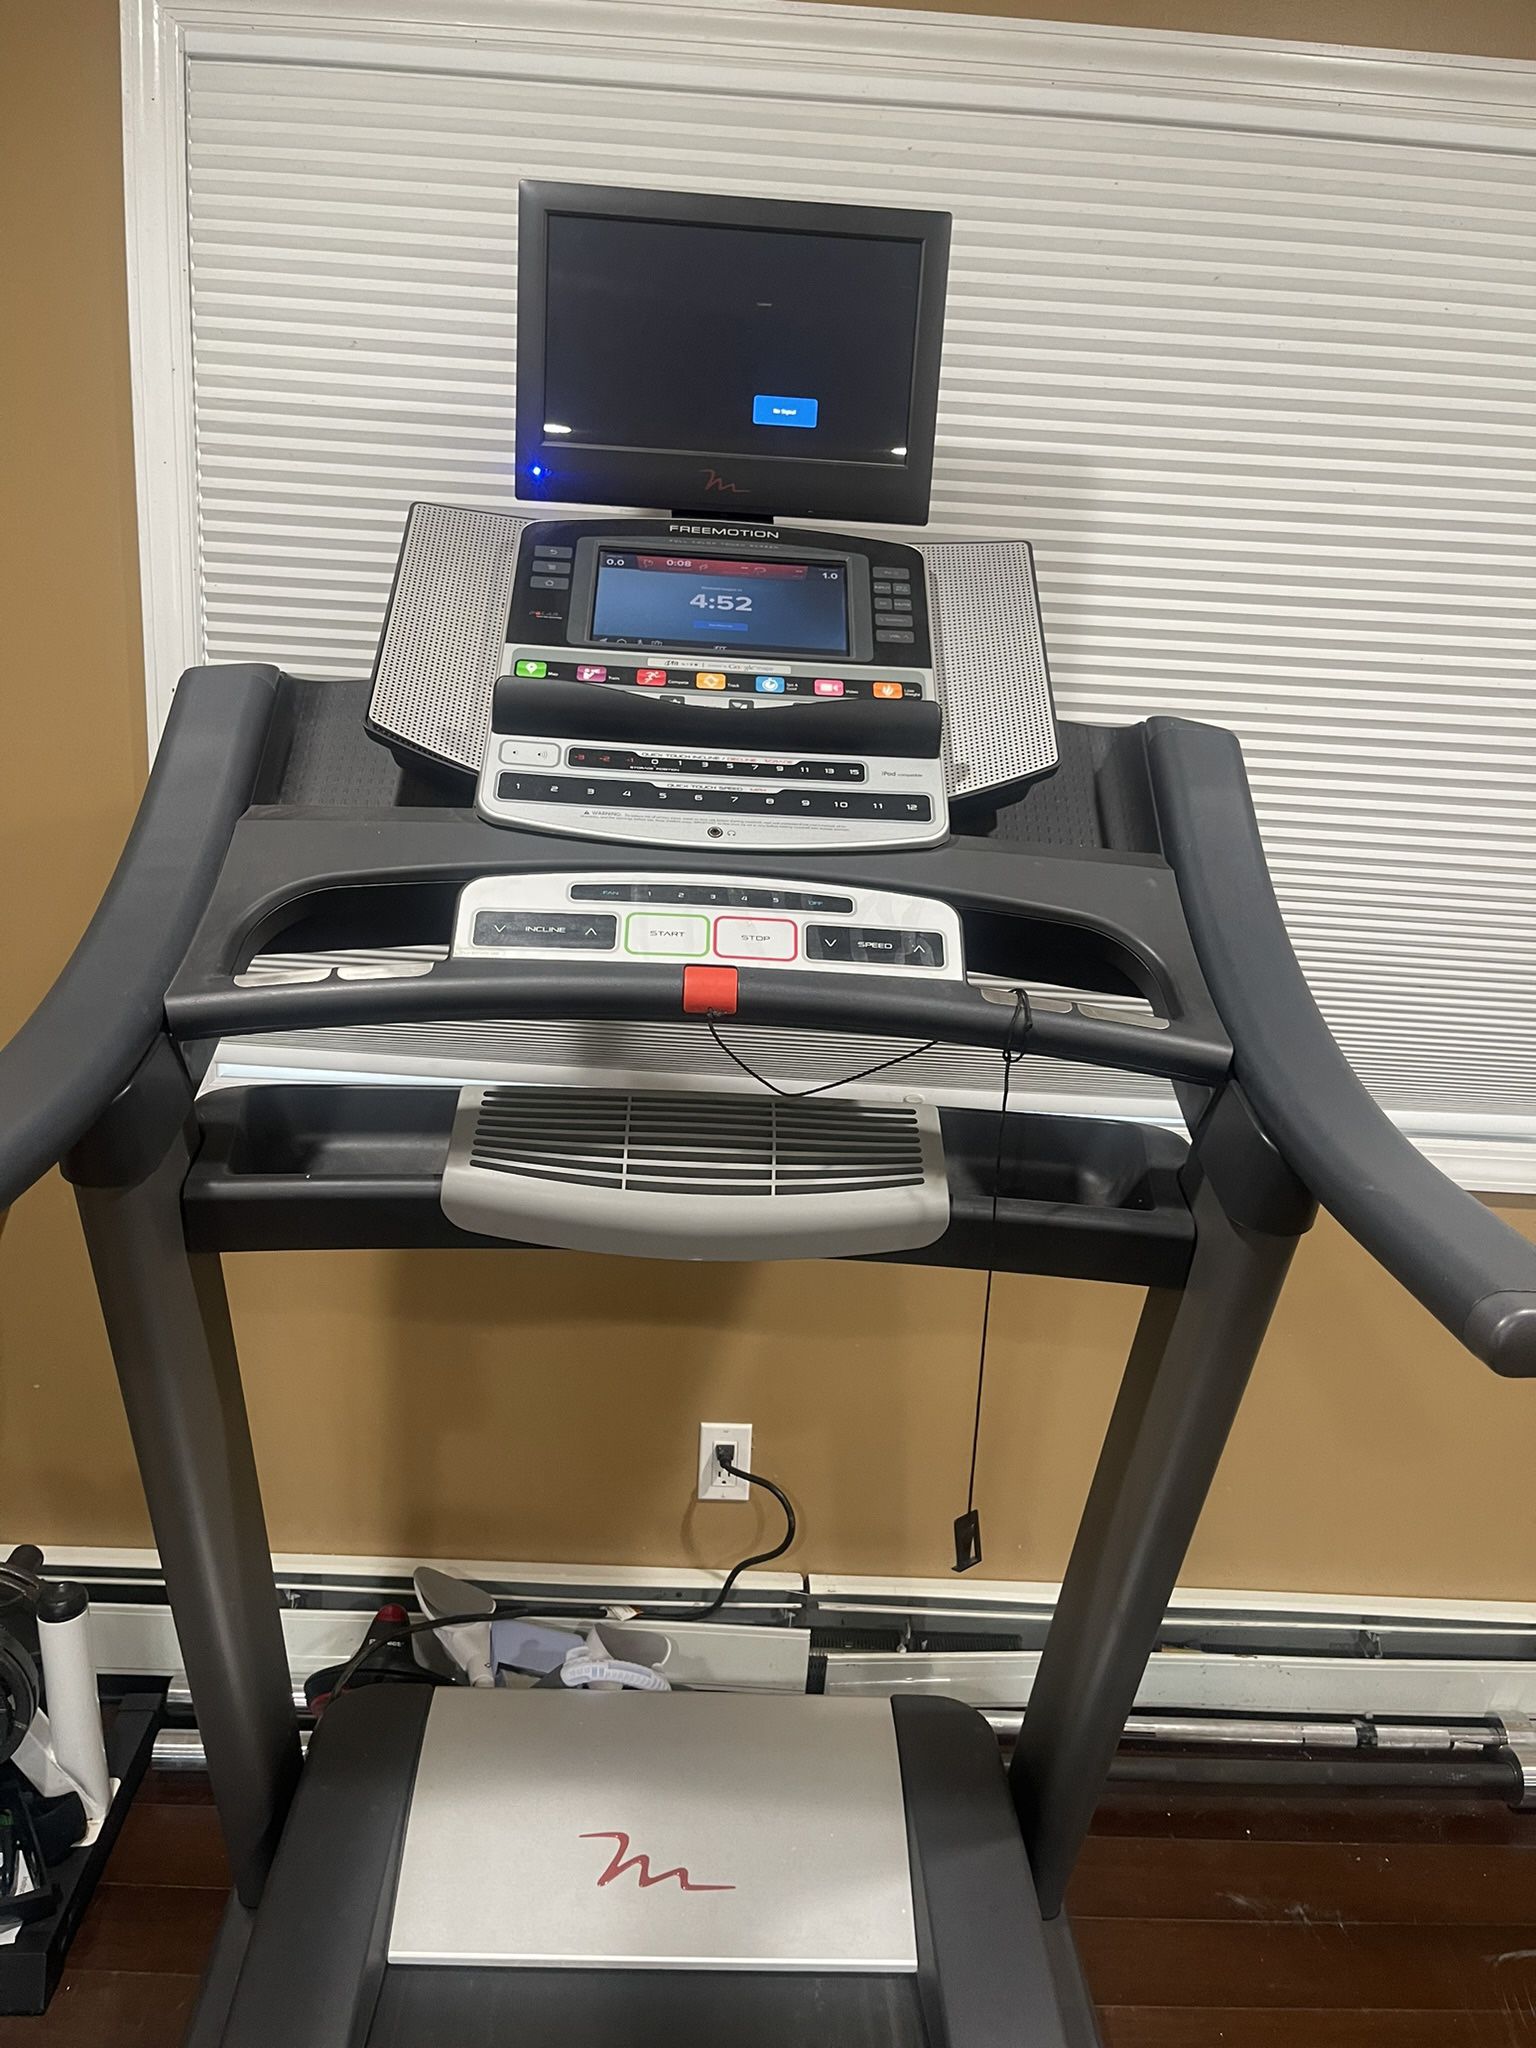 freemotion 790 interactive treadmill Barely Used 